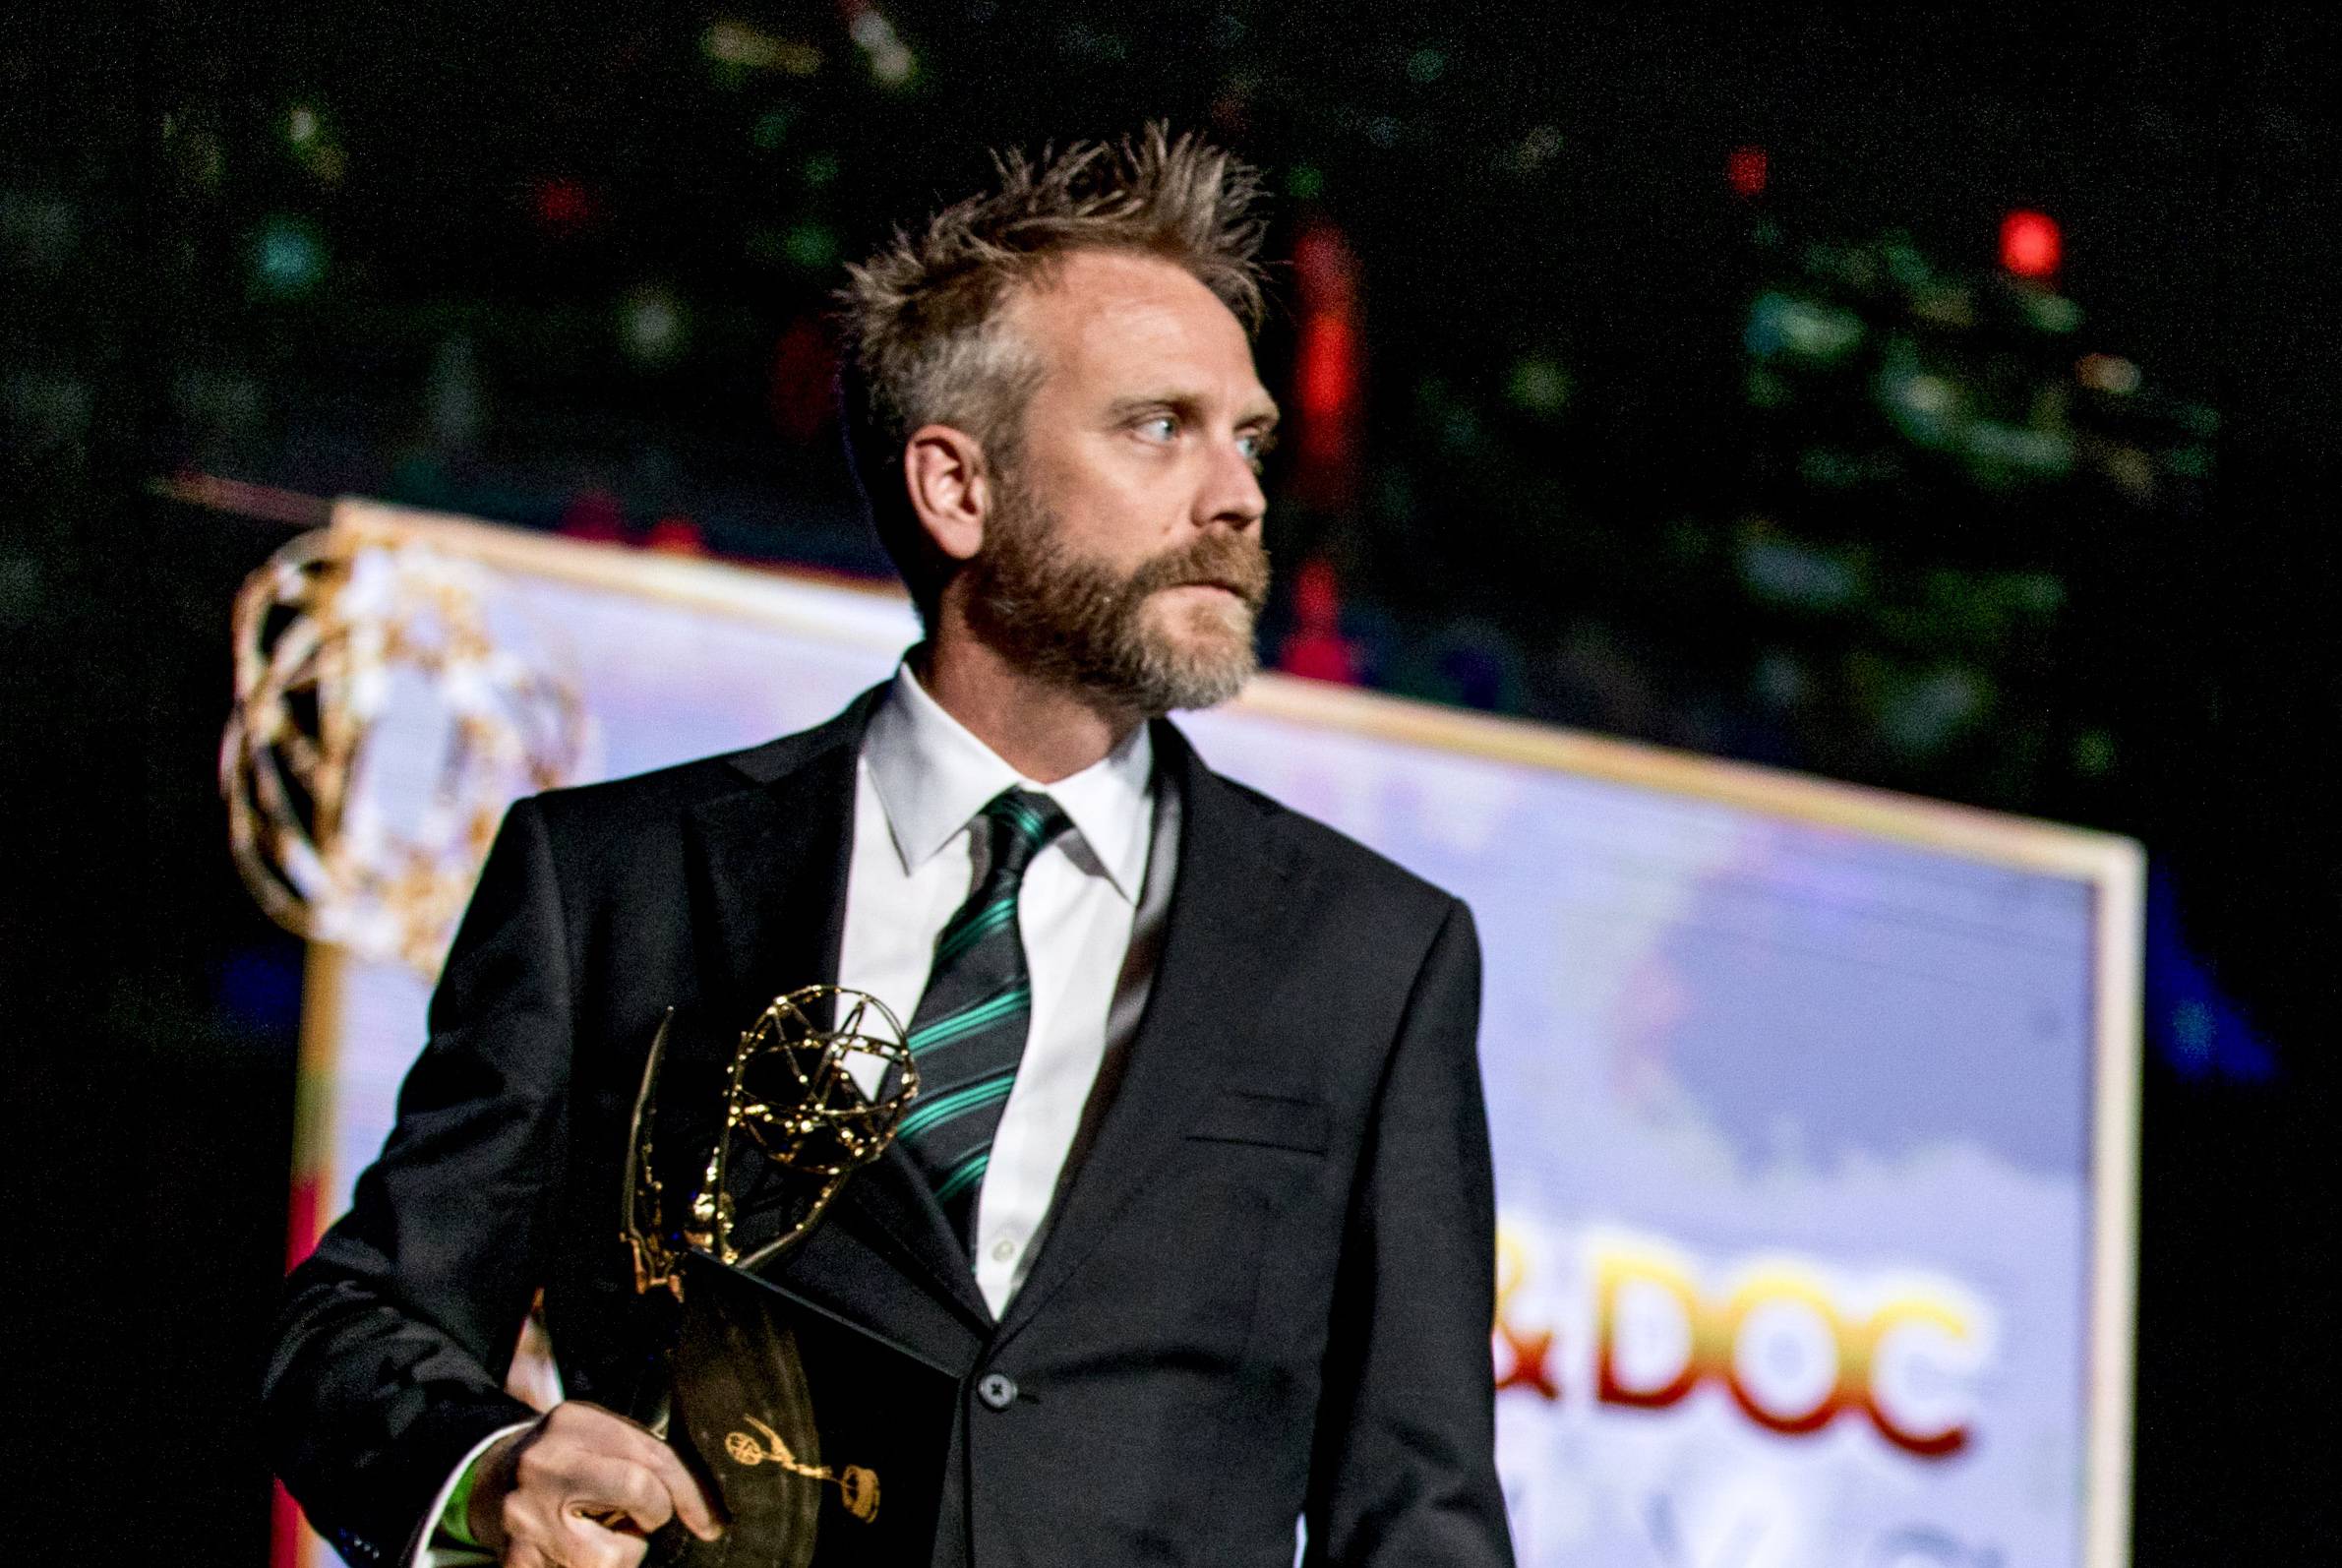 MAN HOLDING EMMY AWARD WHILE ON STAGE